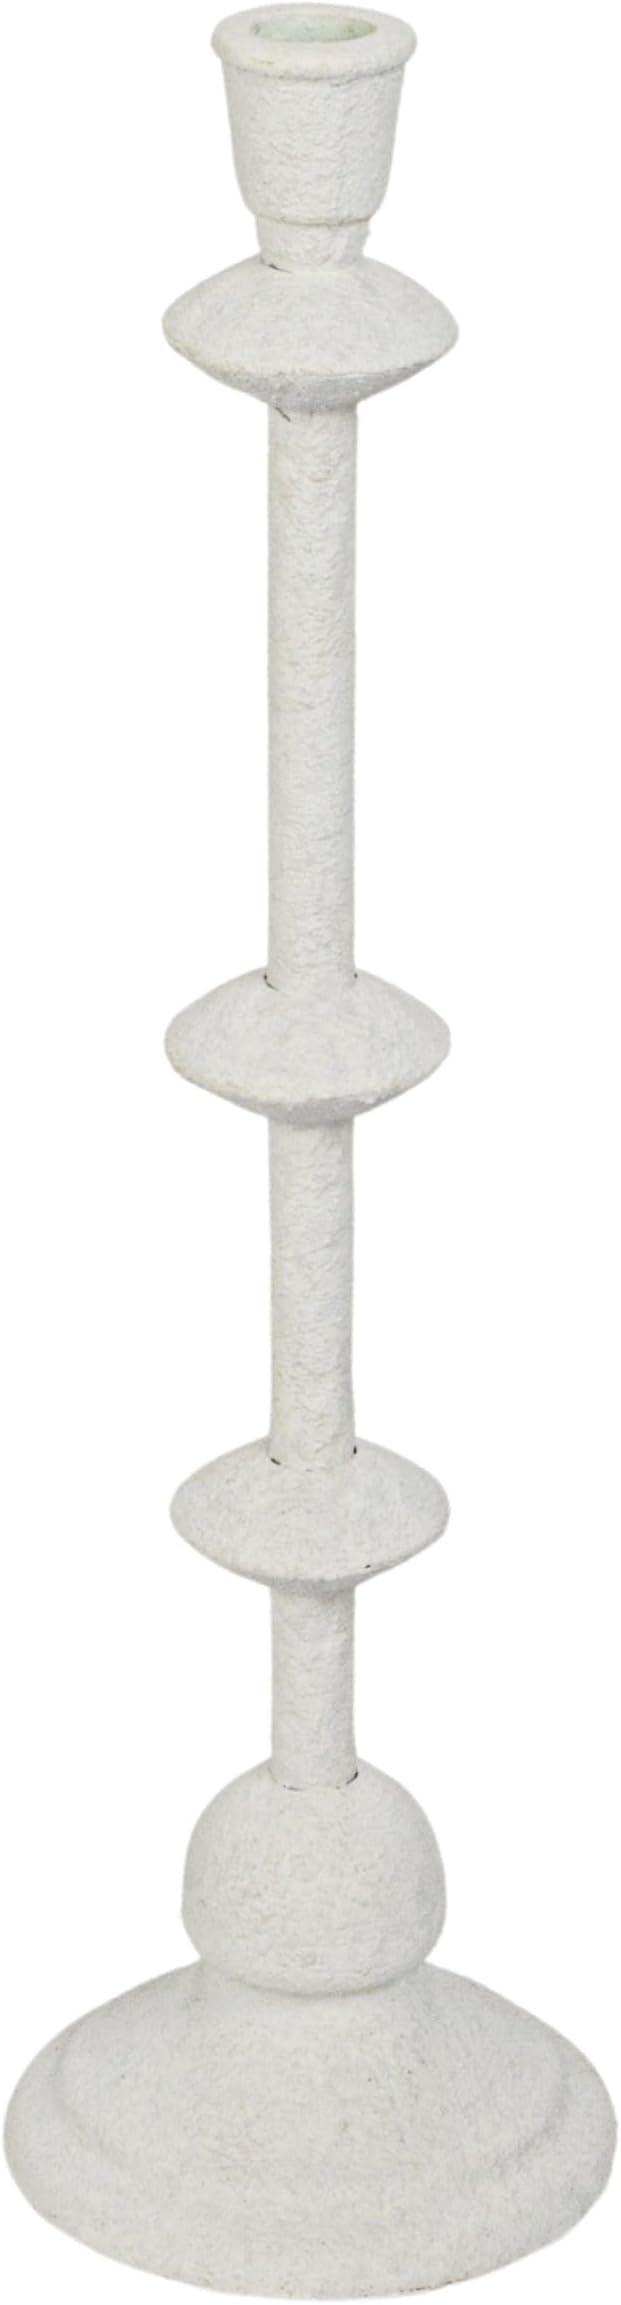 Creative Co-Op Tall Metal Taper Candle Holder in Sand Finish, Antique White | Amazon (US)